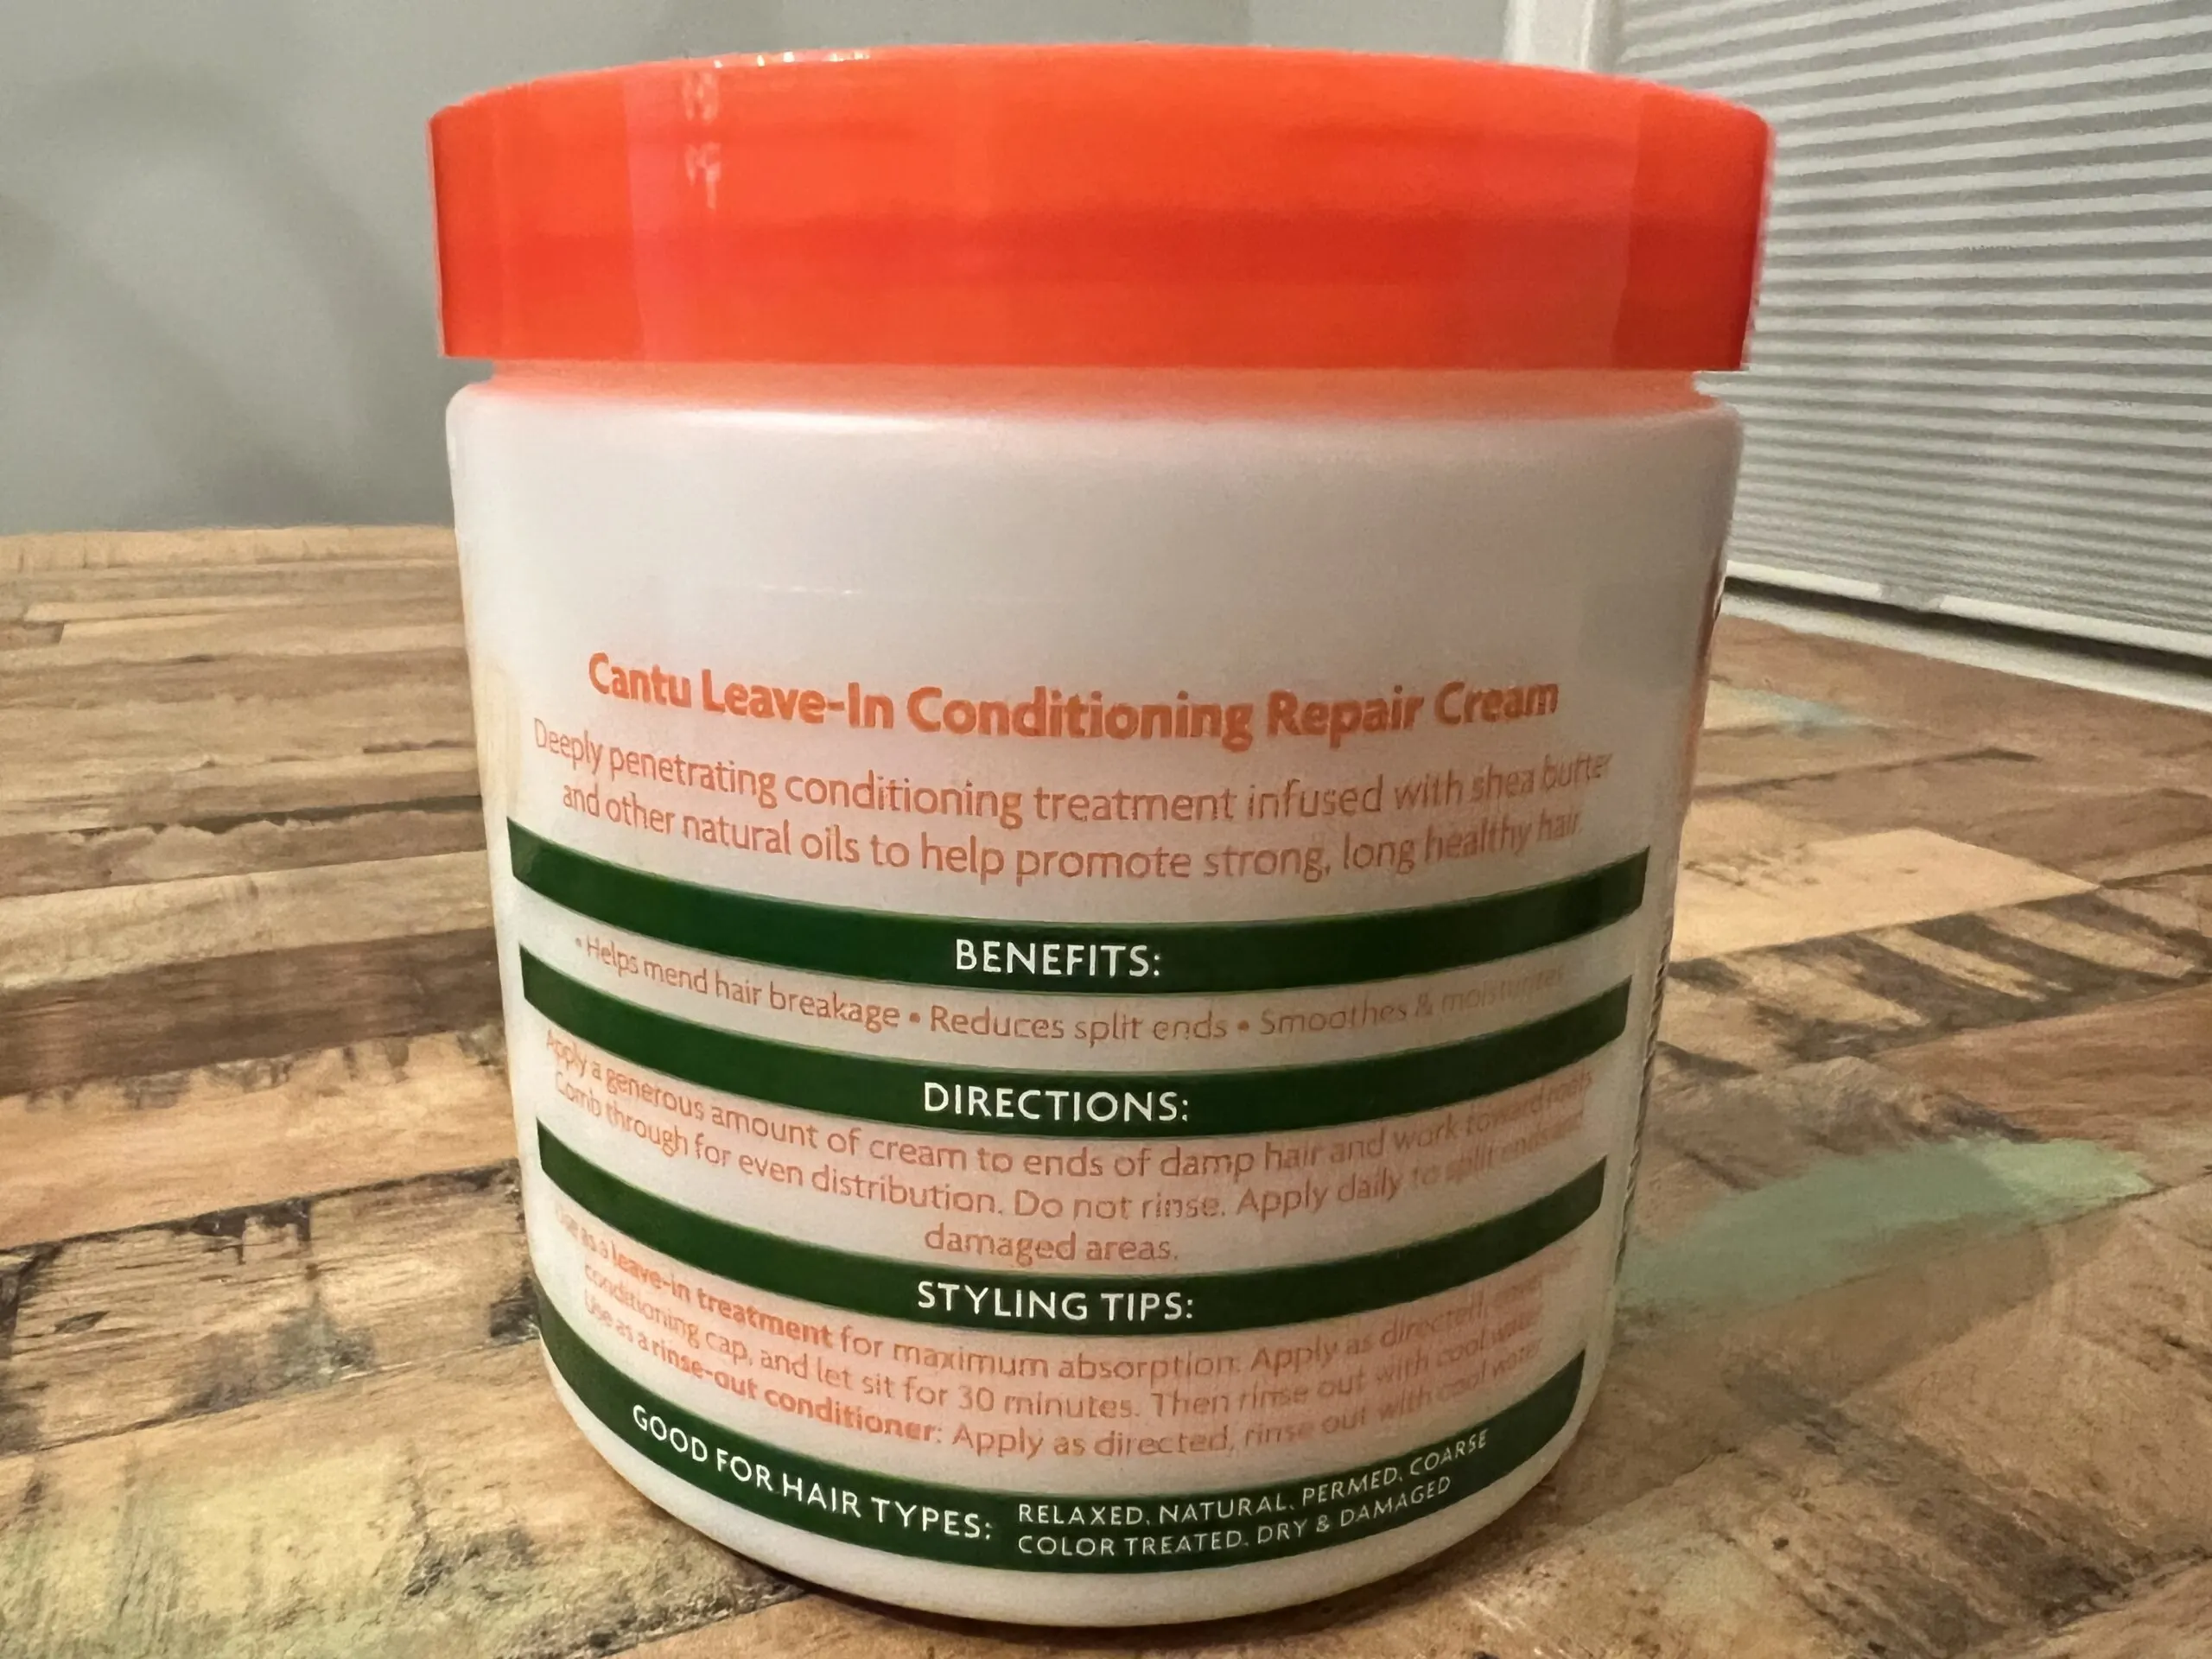 Hands applying Cantu Shea Butter Leave-In Conditioning Repair Cream, demonstrating its use for intense hair moisture and repair.